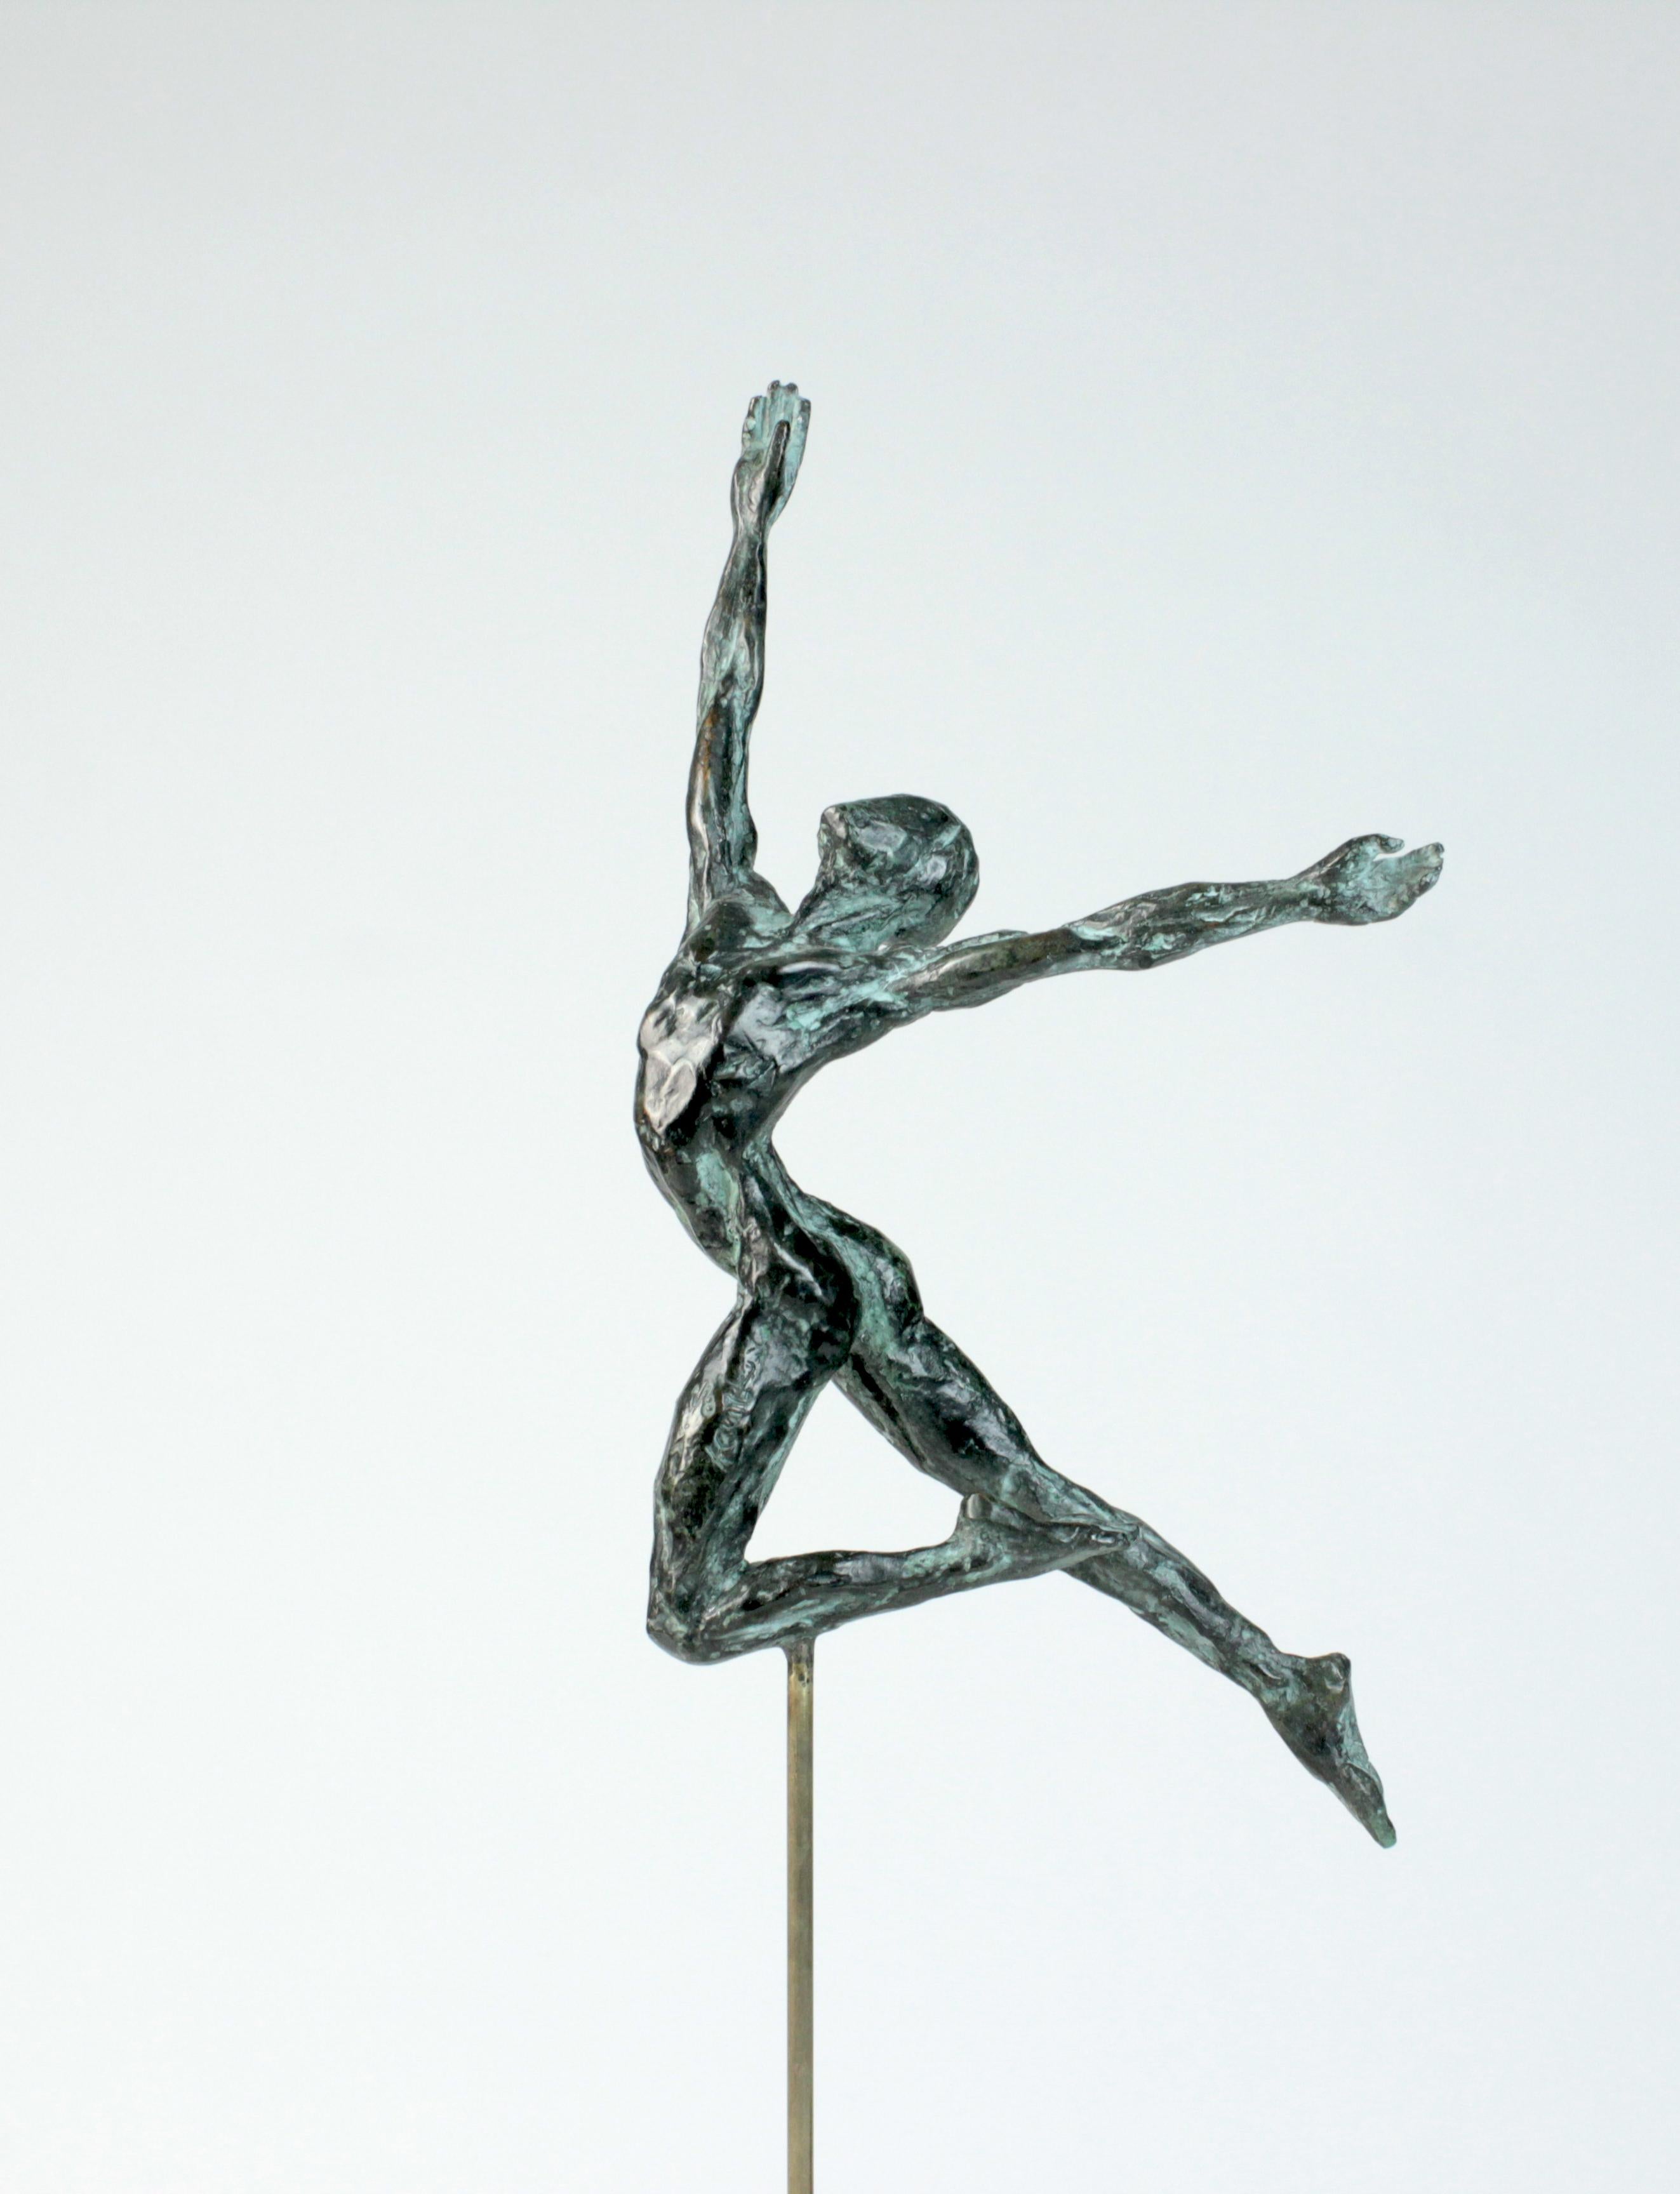 Dancer “Elevation” is a bronze sculpture by contemporary artist Yann Guillon, dimensions are 37 × 22 × 15 cm (14.6 × 8.7 × 5.9 in). Height of the sculpture with the metal base: 51 cm (20 in). 
The sculpture is signed and numbered, it is part of a